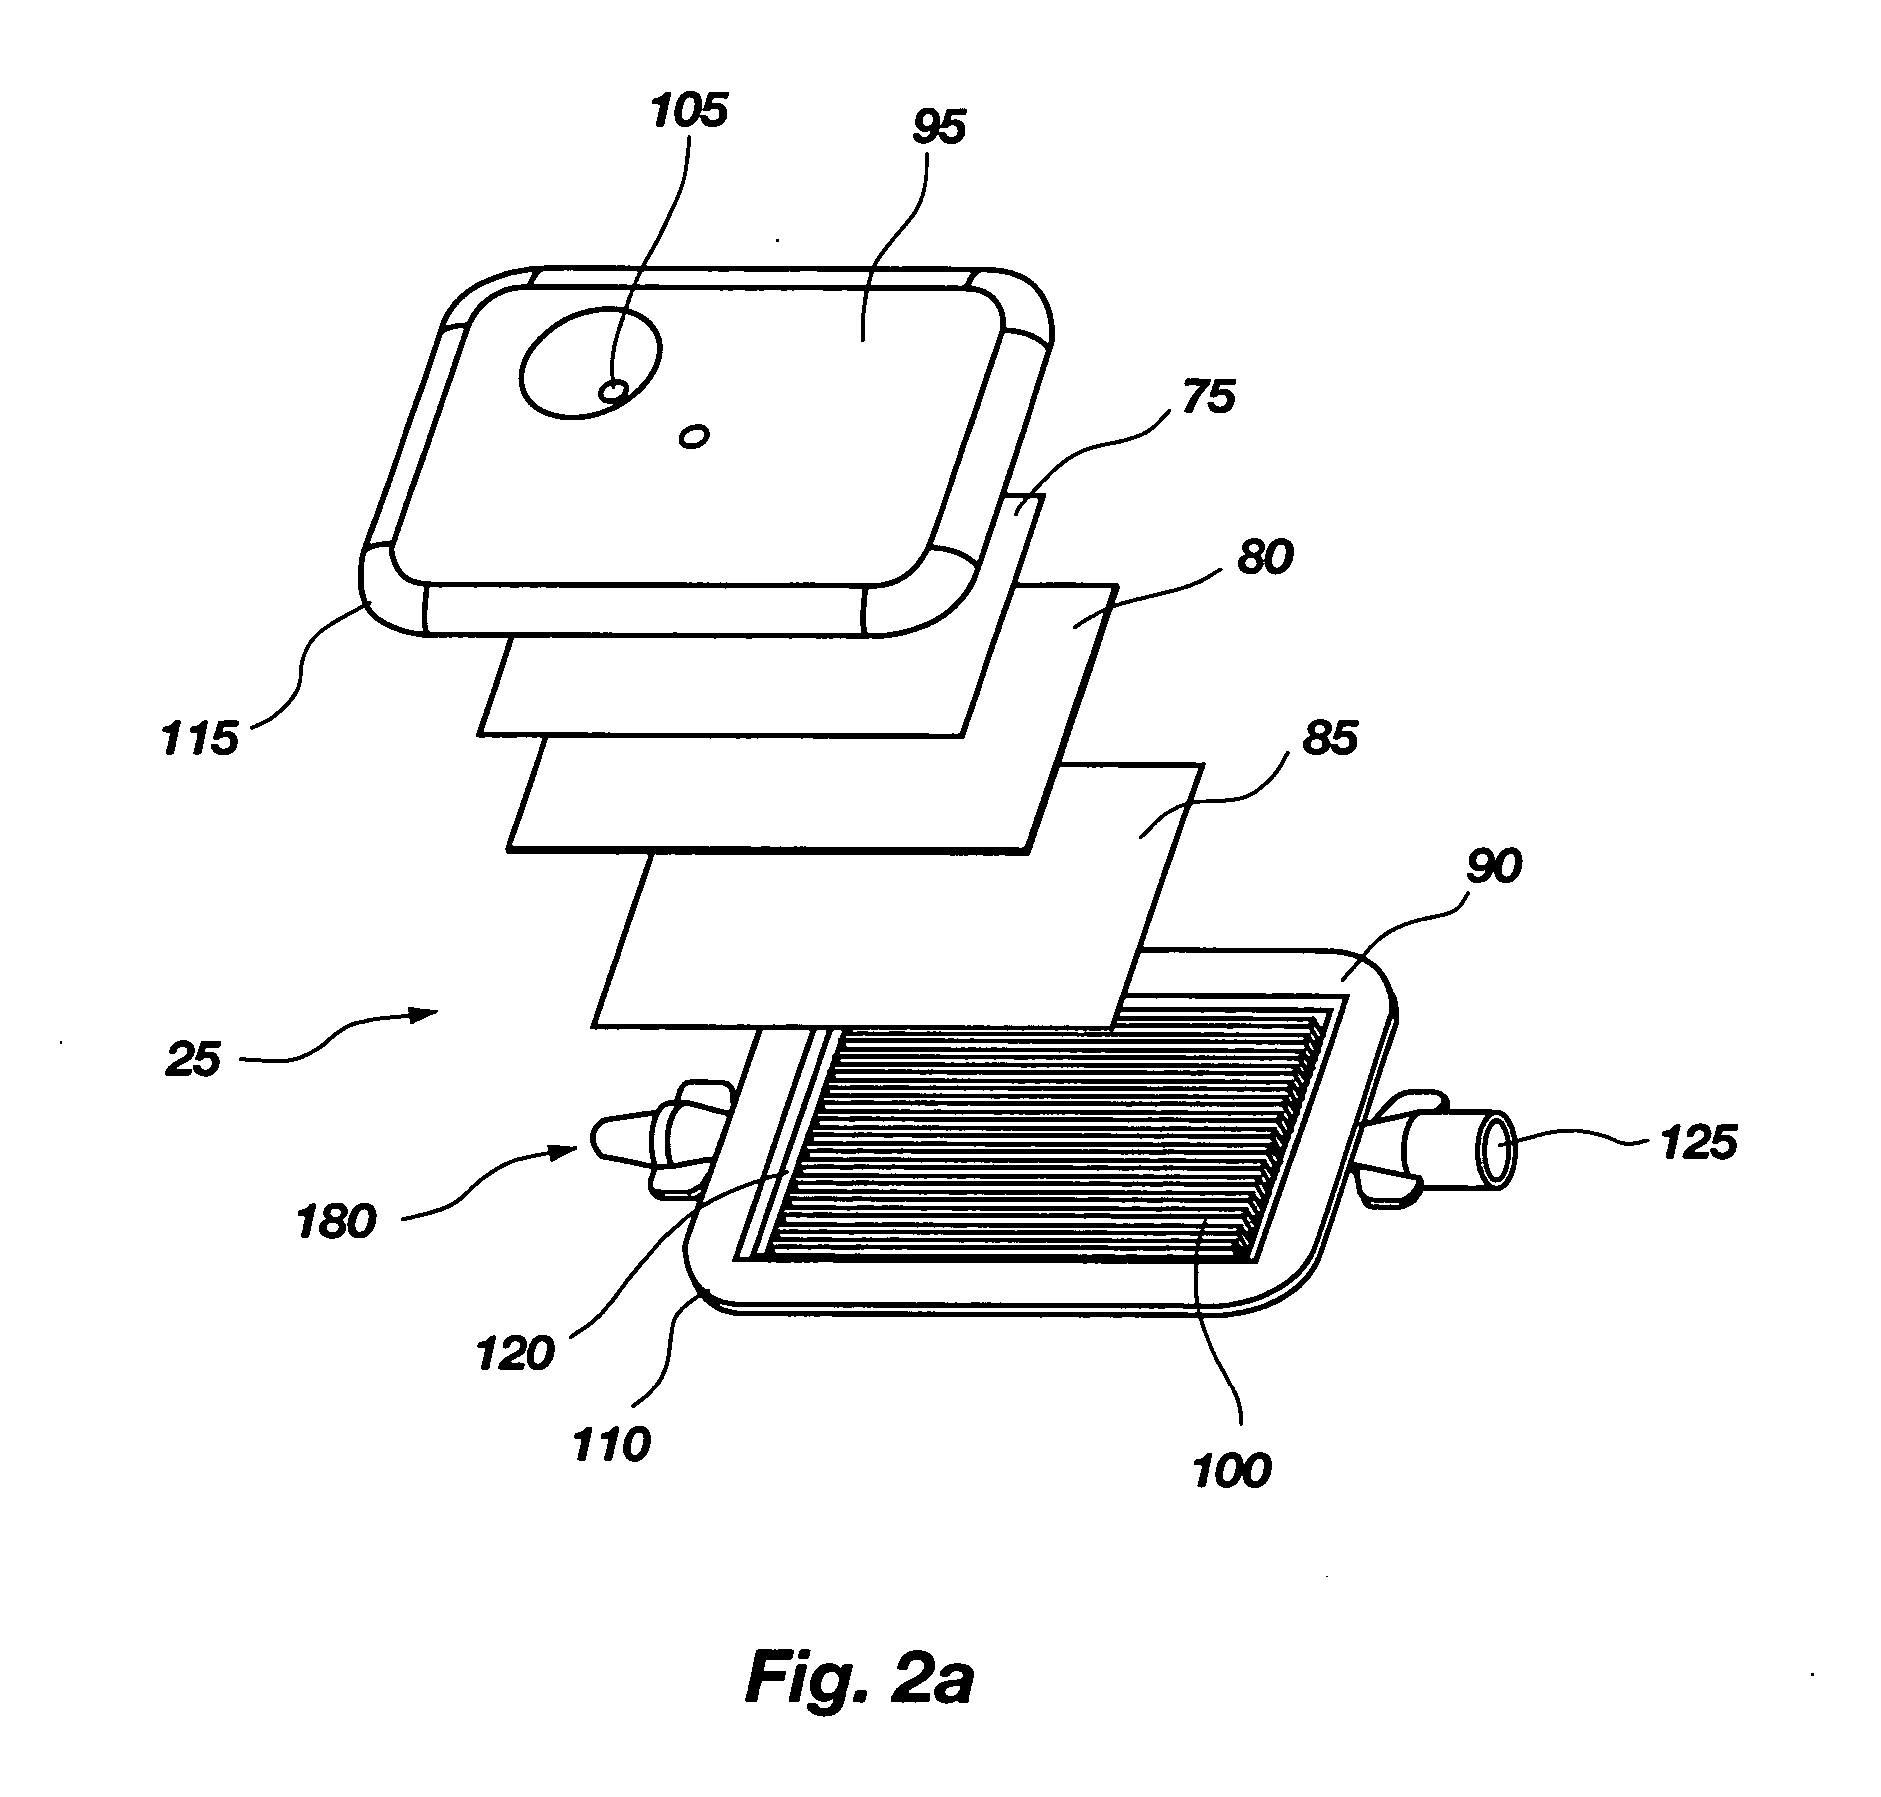 Apparatus and method for peritoneal dialysis